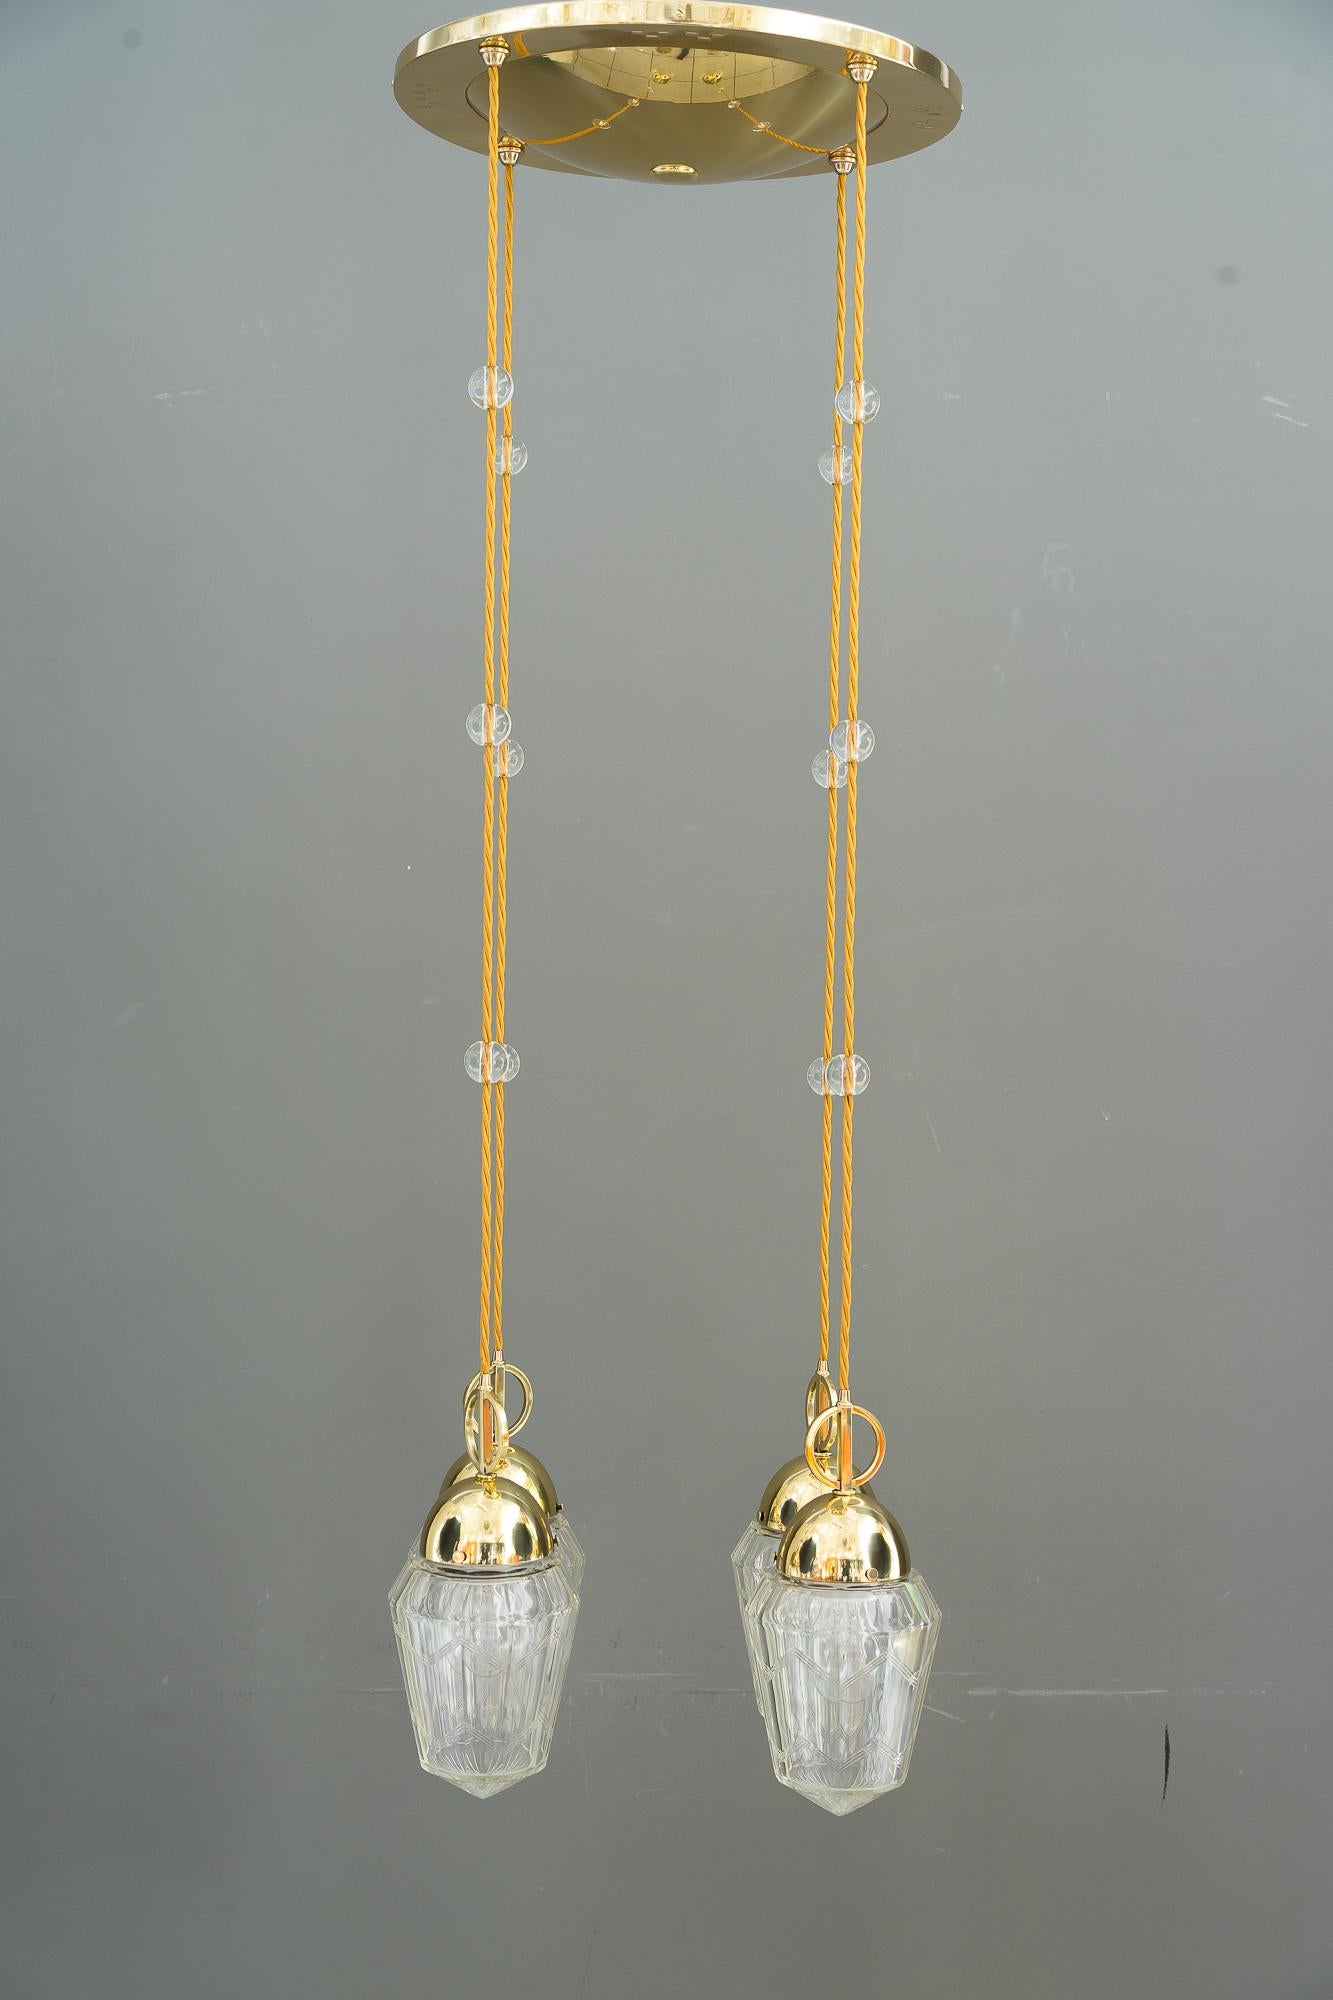 Art Deco chandelier vienna around 1920s
Polished and stove enameled
Original cut glass shades
We can adjust the height of the chandelier to your room height
The wires are replaced ( new )
The glass balls on the wire are replaced ( new ).

